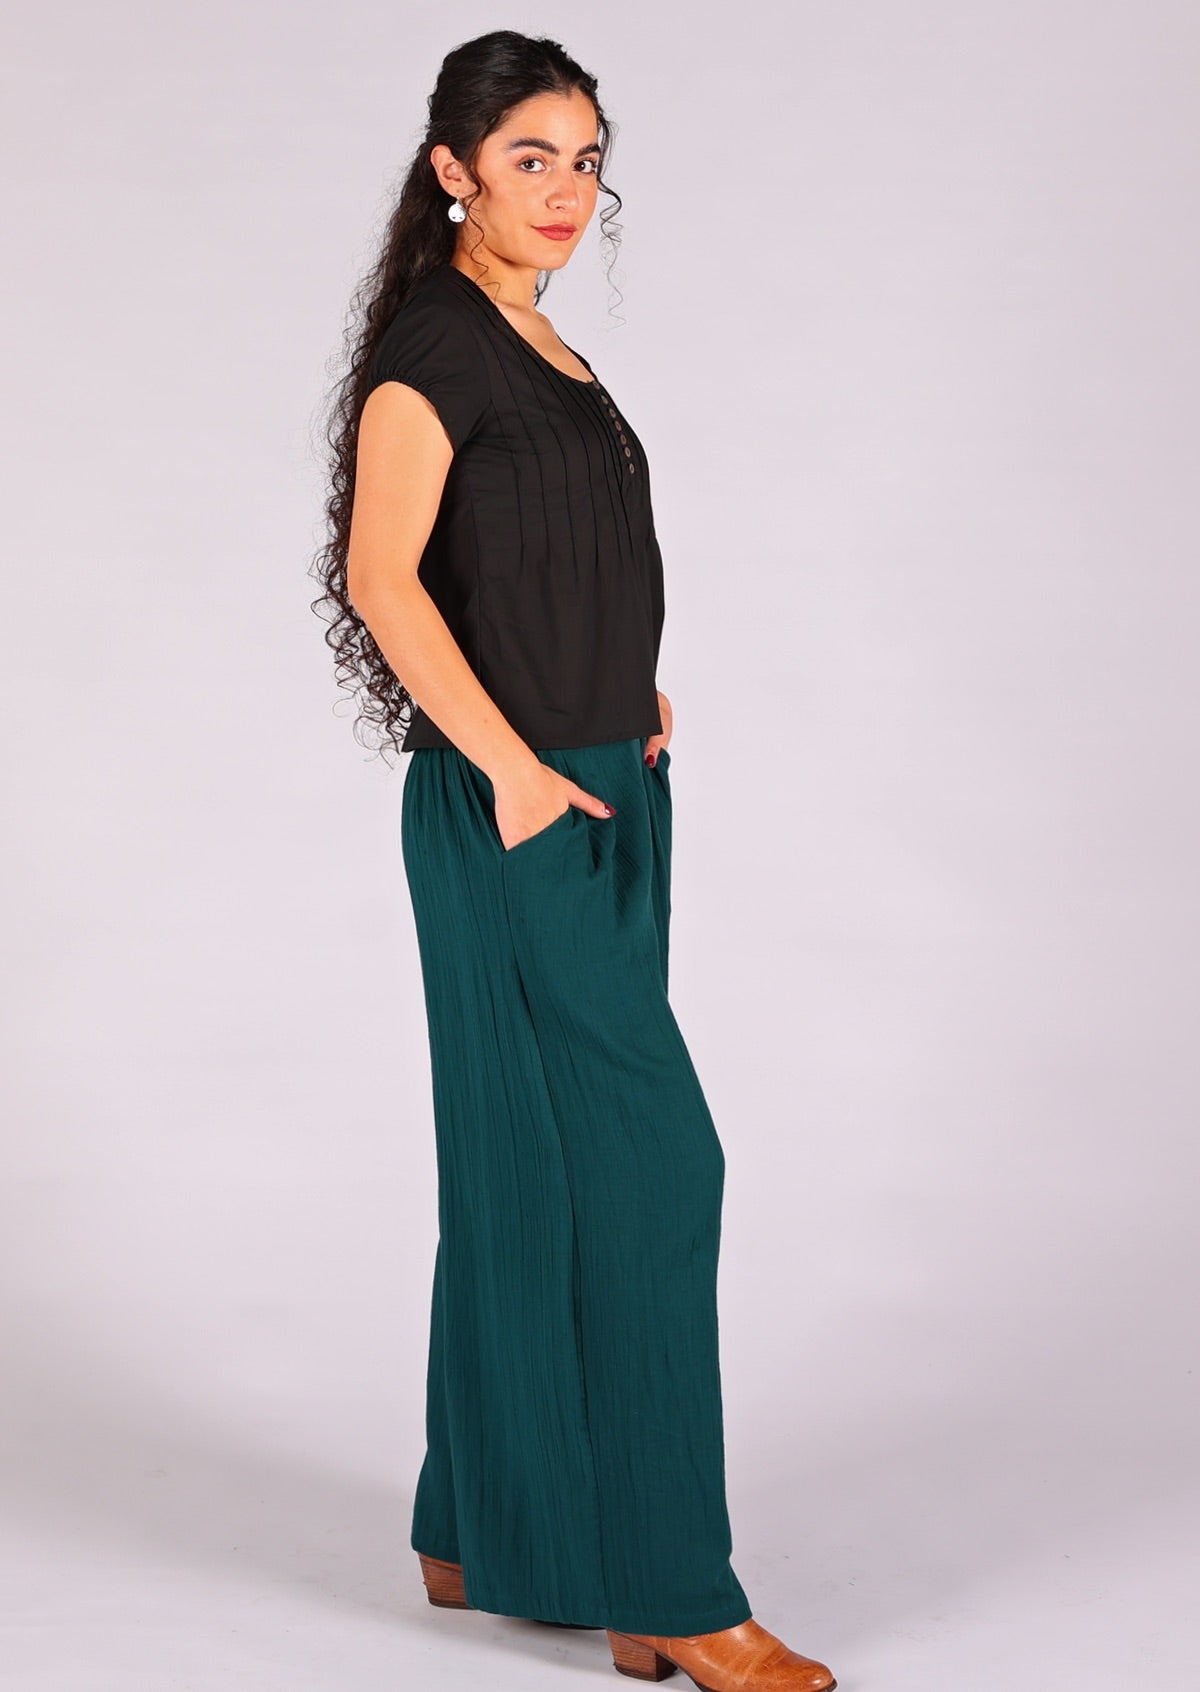 Super comfortable and stylish cotton gauze wide leg pants with pockets